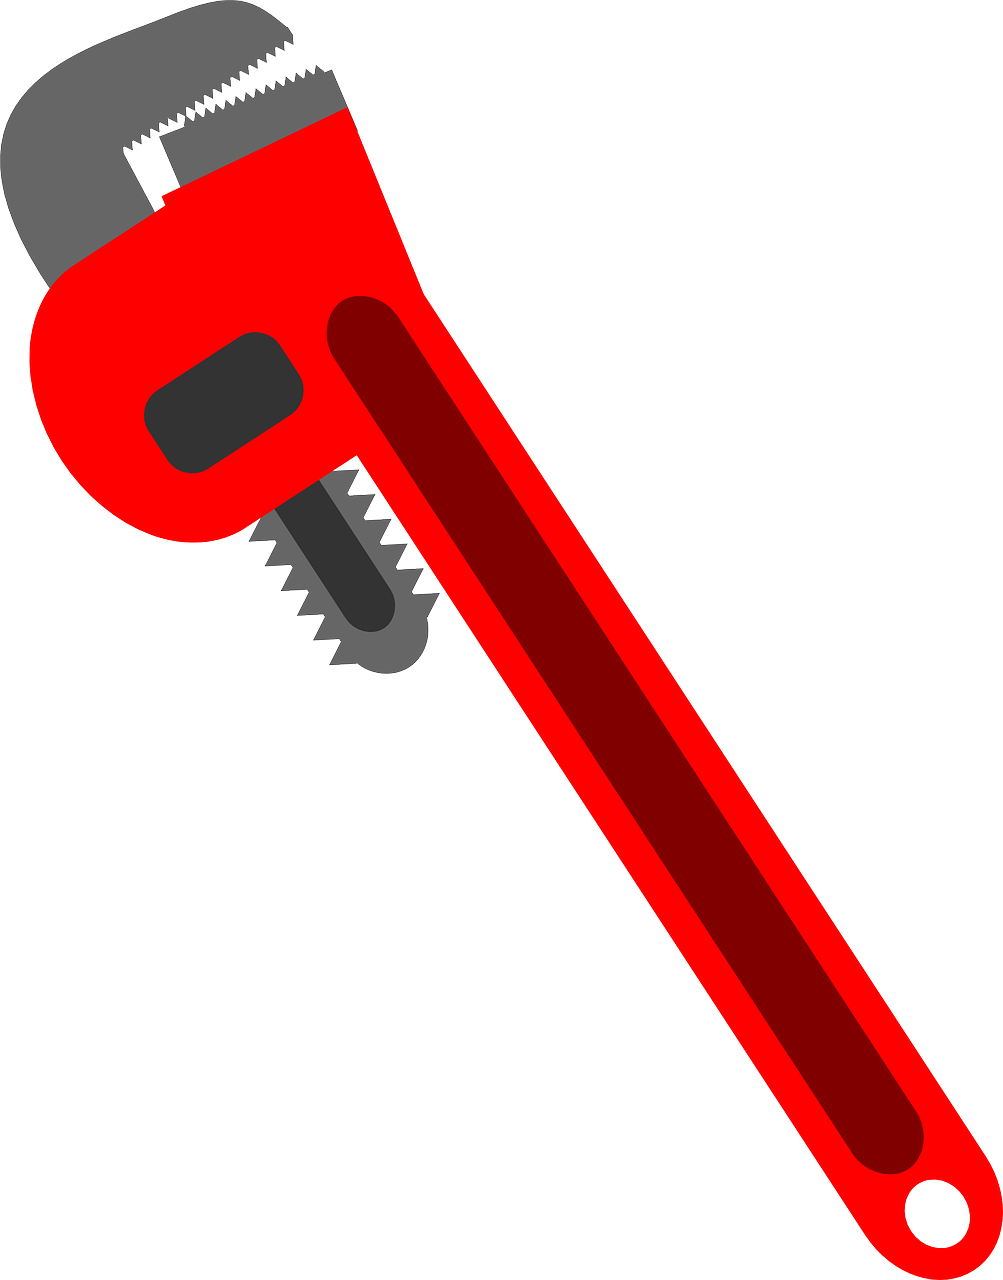 a red wrenet on a black background, a screenshot, wrench, drawn in microsoft paint, plumbing jungle, ((oversaturated))